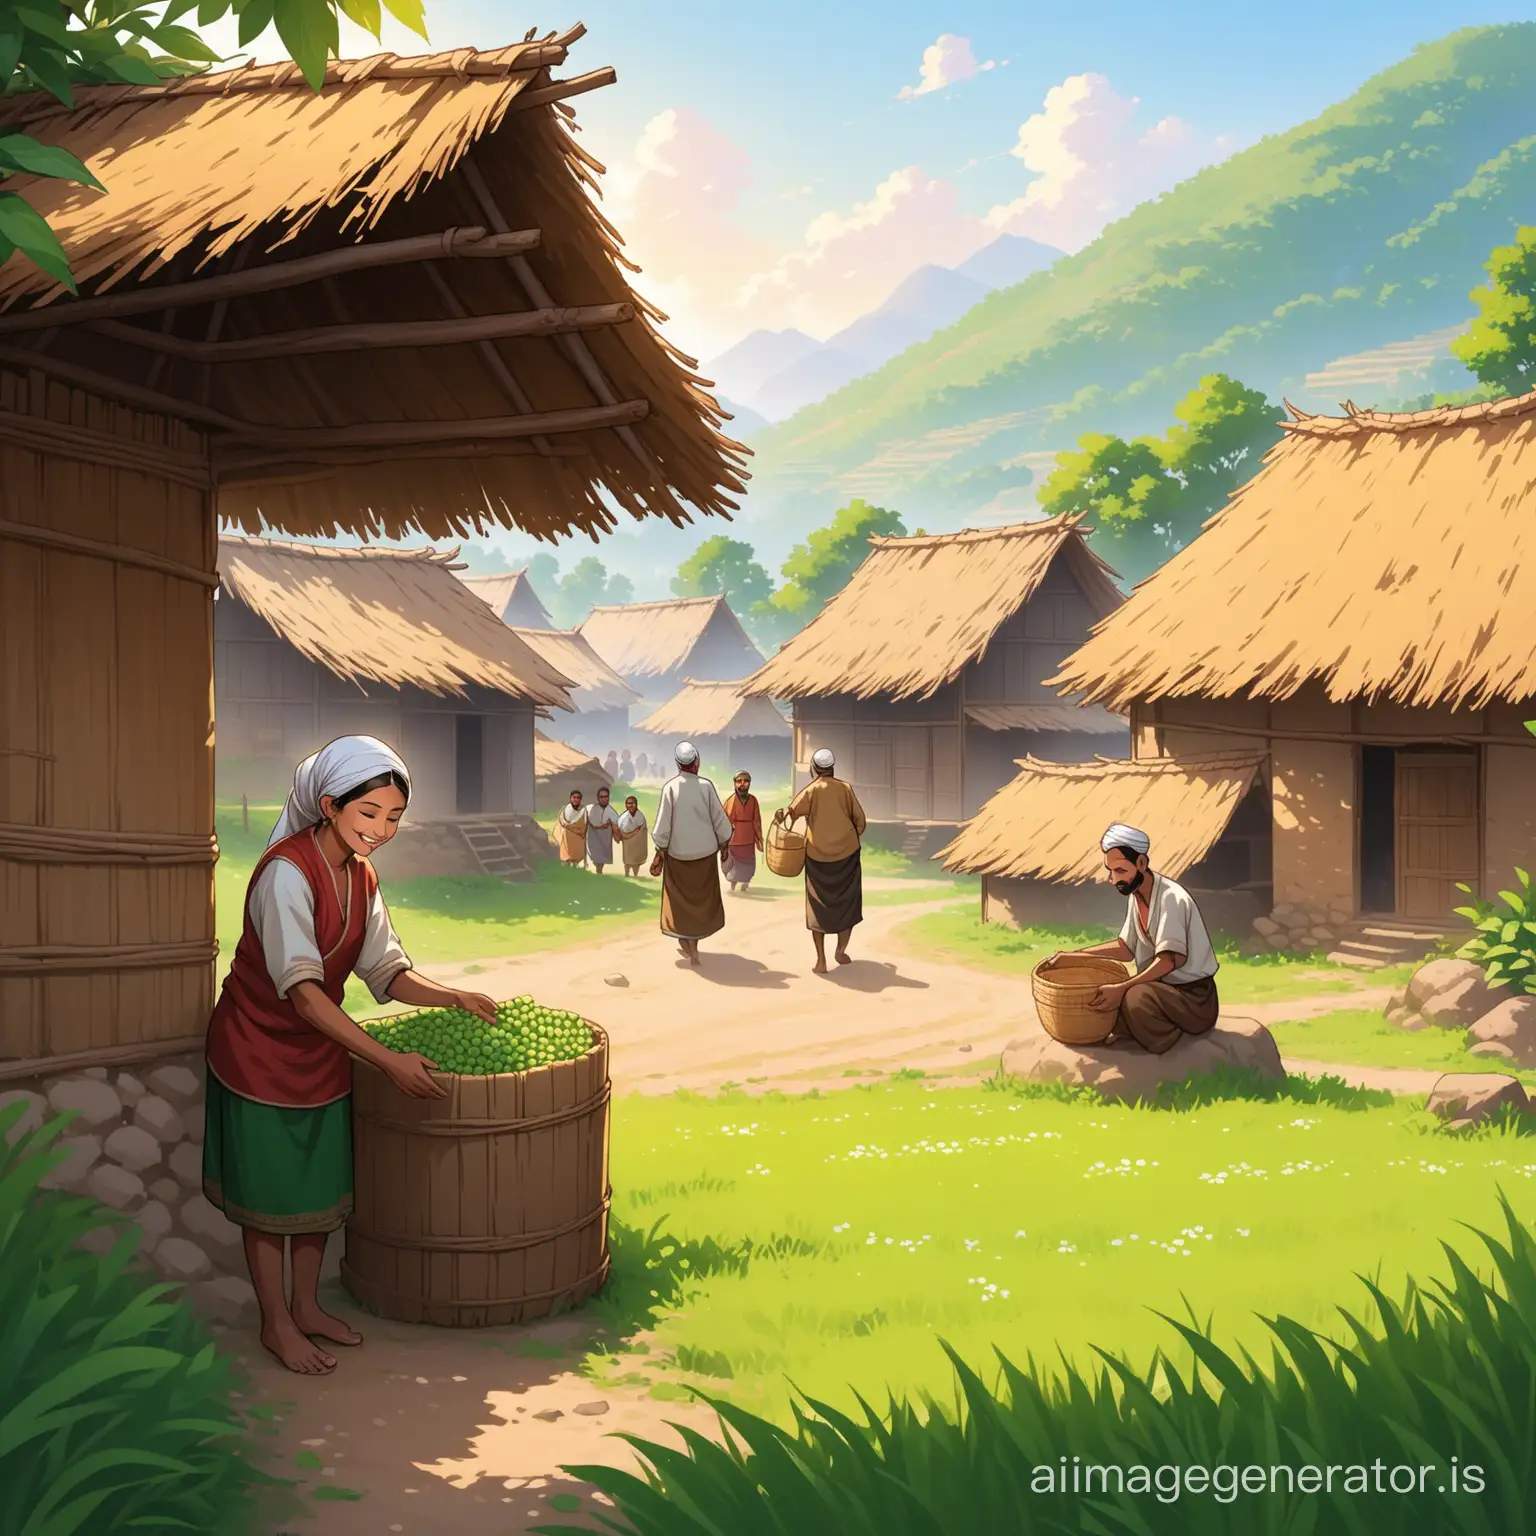 Through interactions with the villagers and experiencing the simple joys of village life, the merchant discovers the true wealth of the community lies in its spirit of kindness and connection with nature.